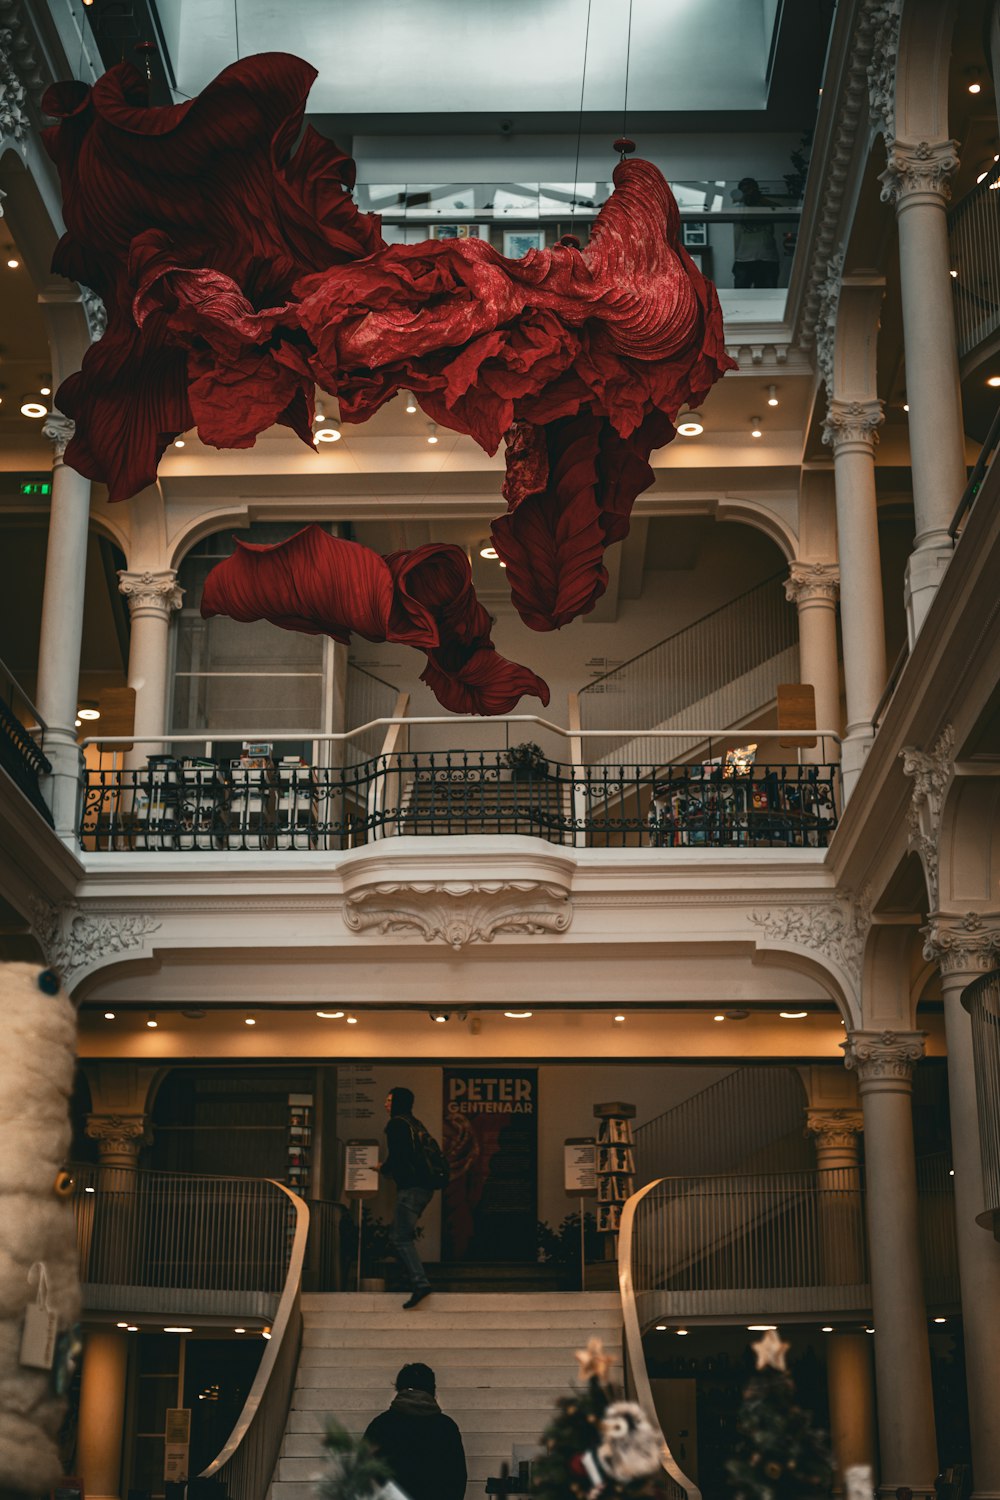 a large red sculpture hanging from the ceiling of a building